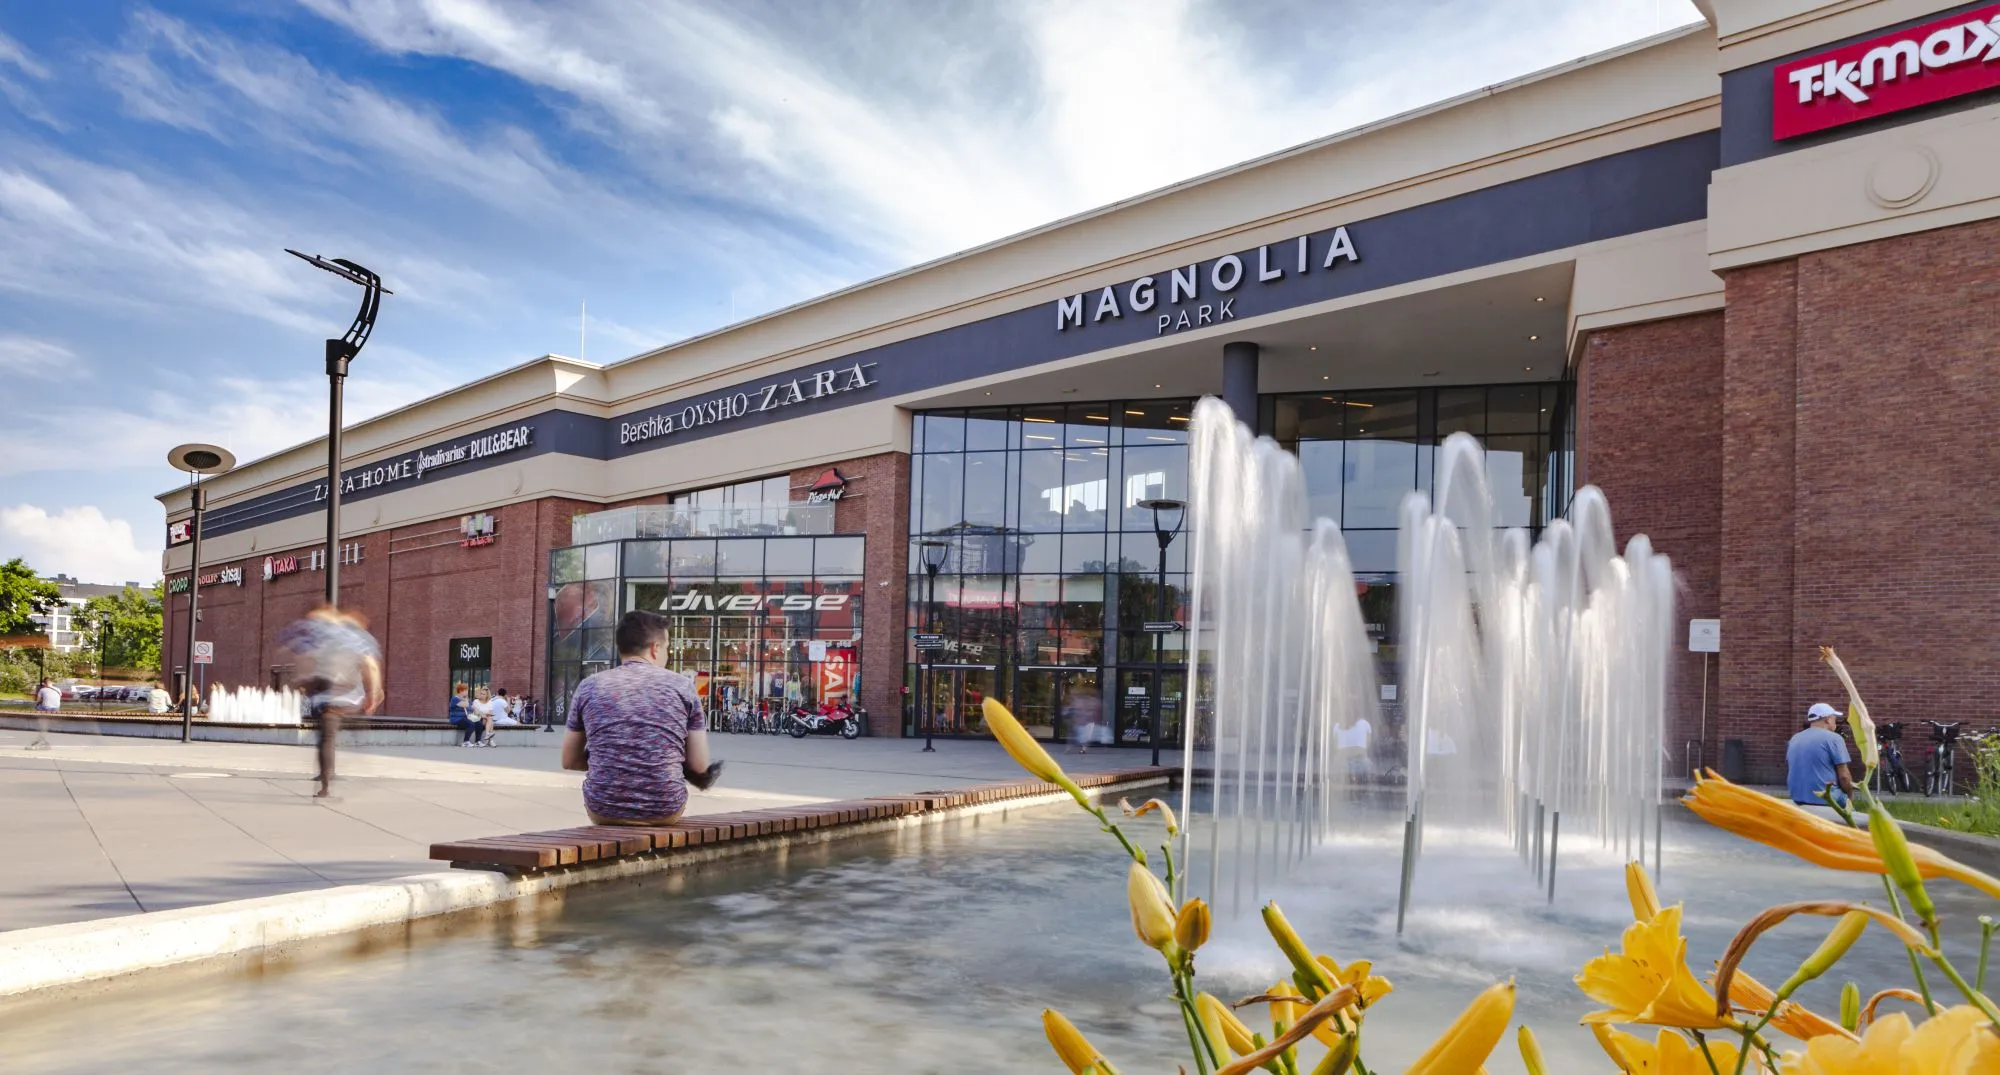 Magnolia Park Mall in Poland, europe | Shoes,Accessories,Clothes,Sportswear,Swimwear - Country Helper